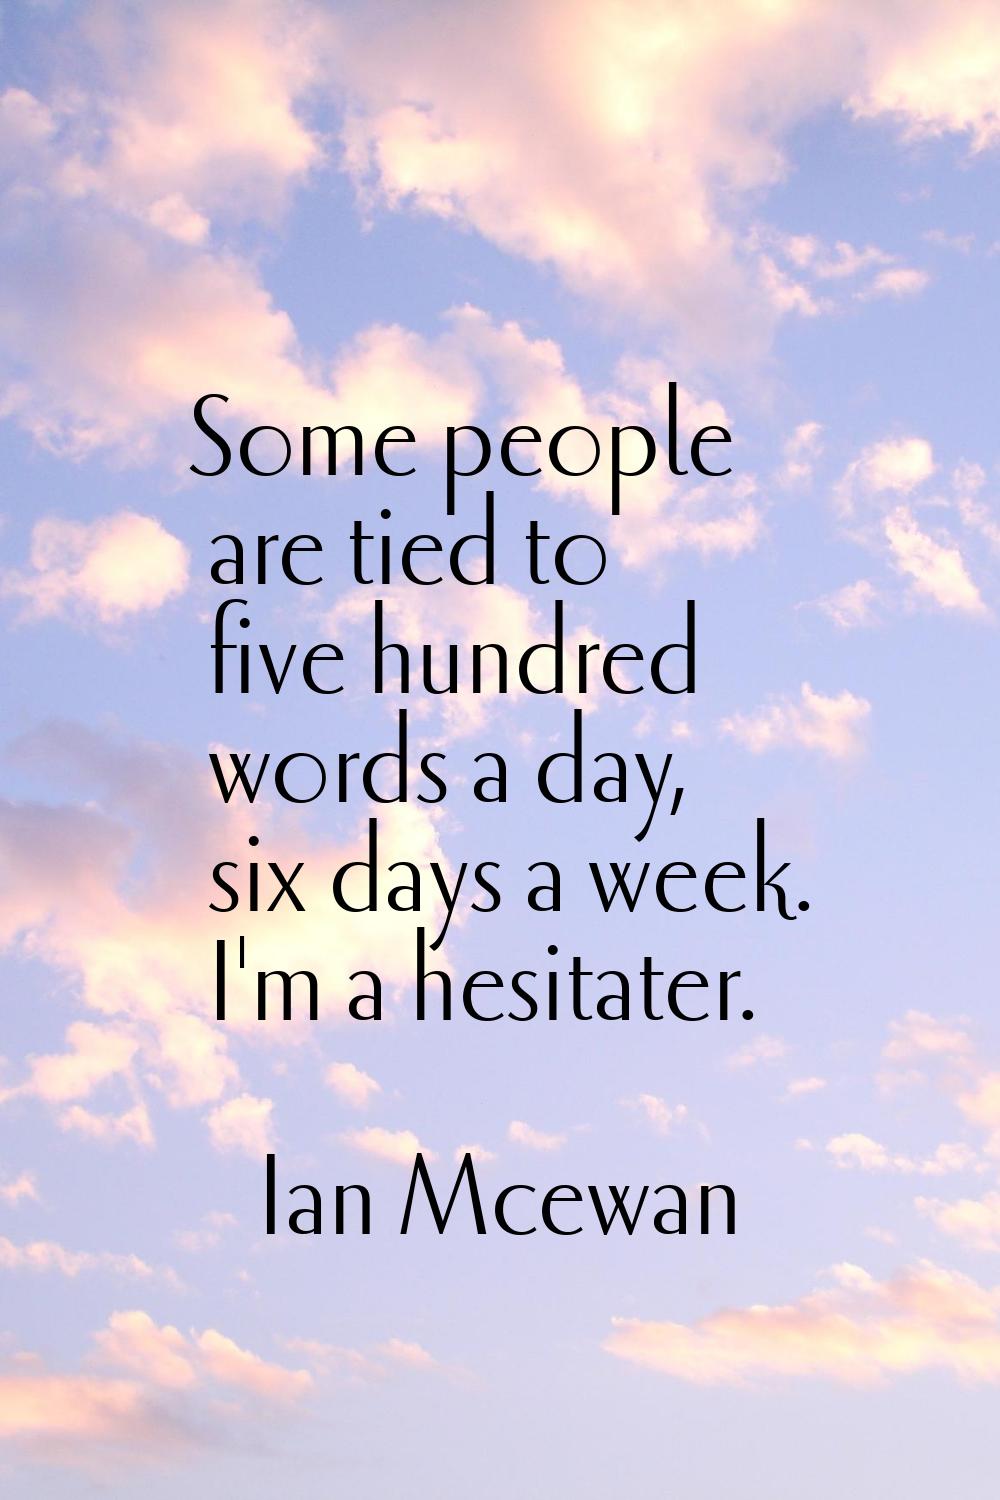 Some people are tied to five hundred words a day, six days a week. I'm a hesitater.